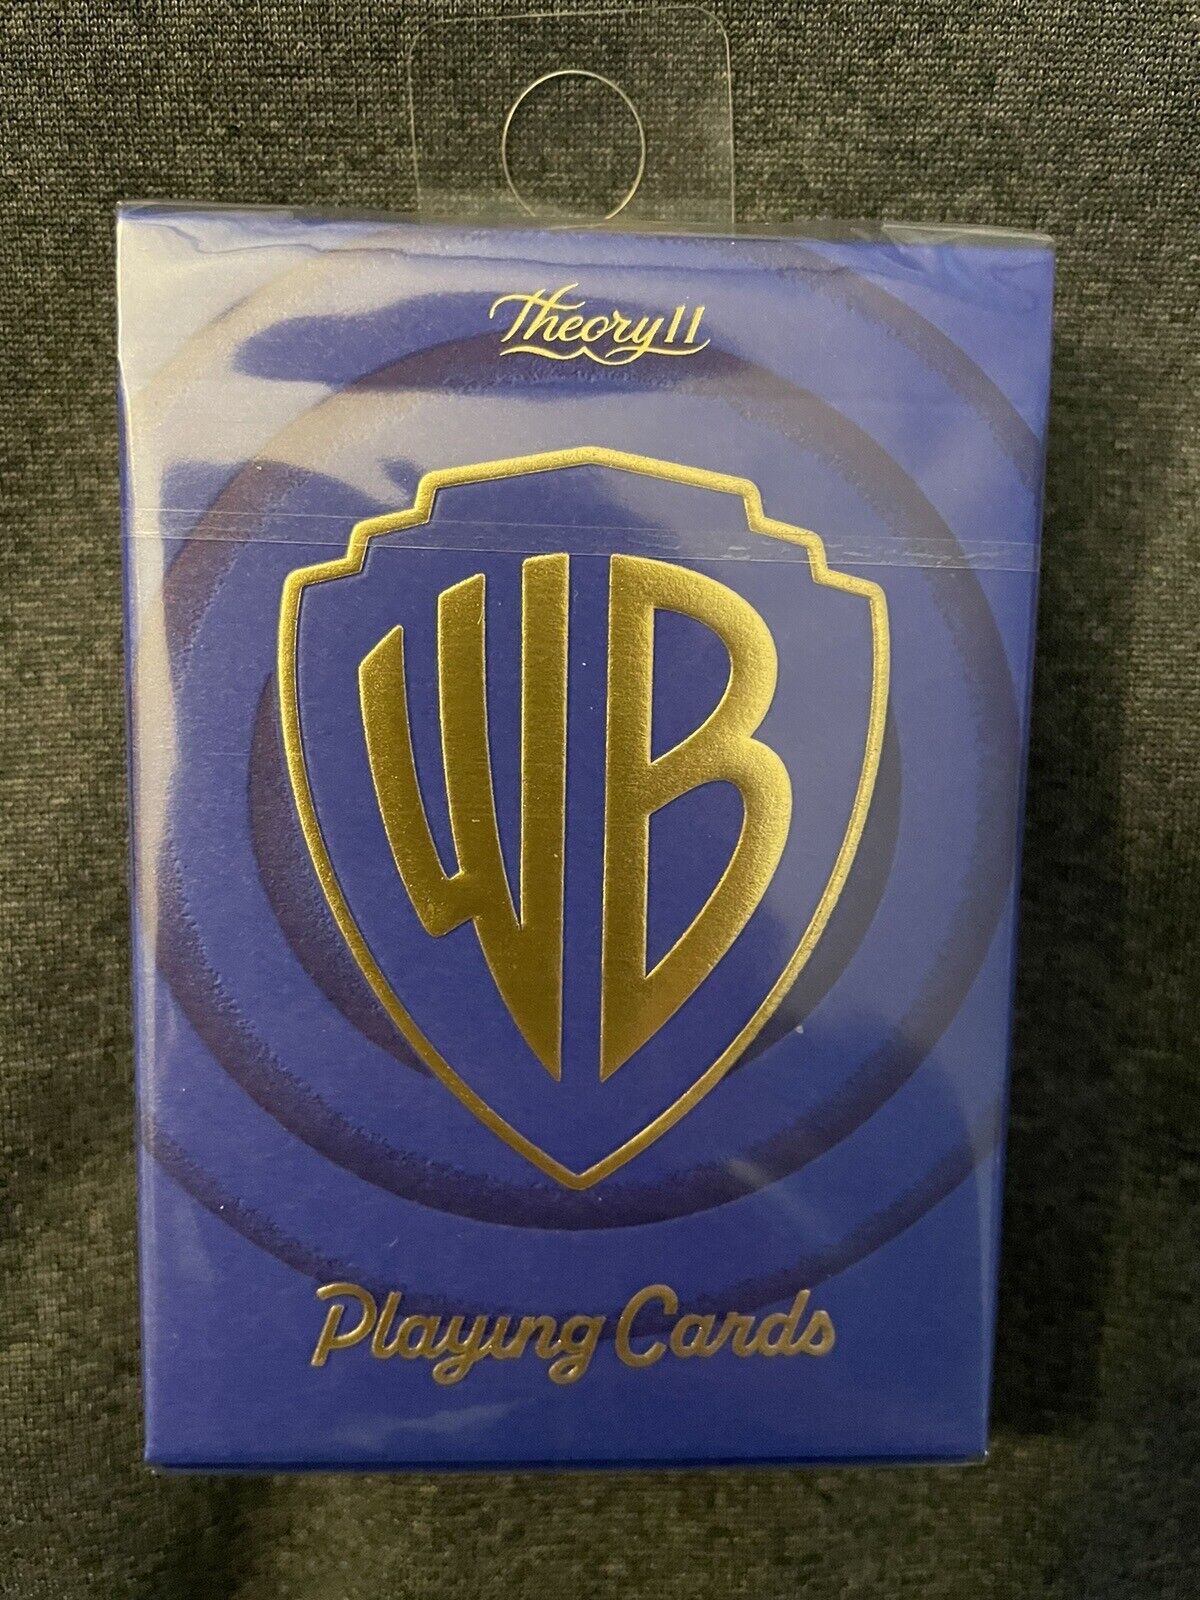 Theory 11 Warner Brothers Limited Edition Playing Cards